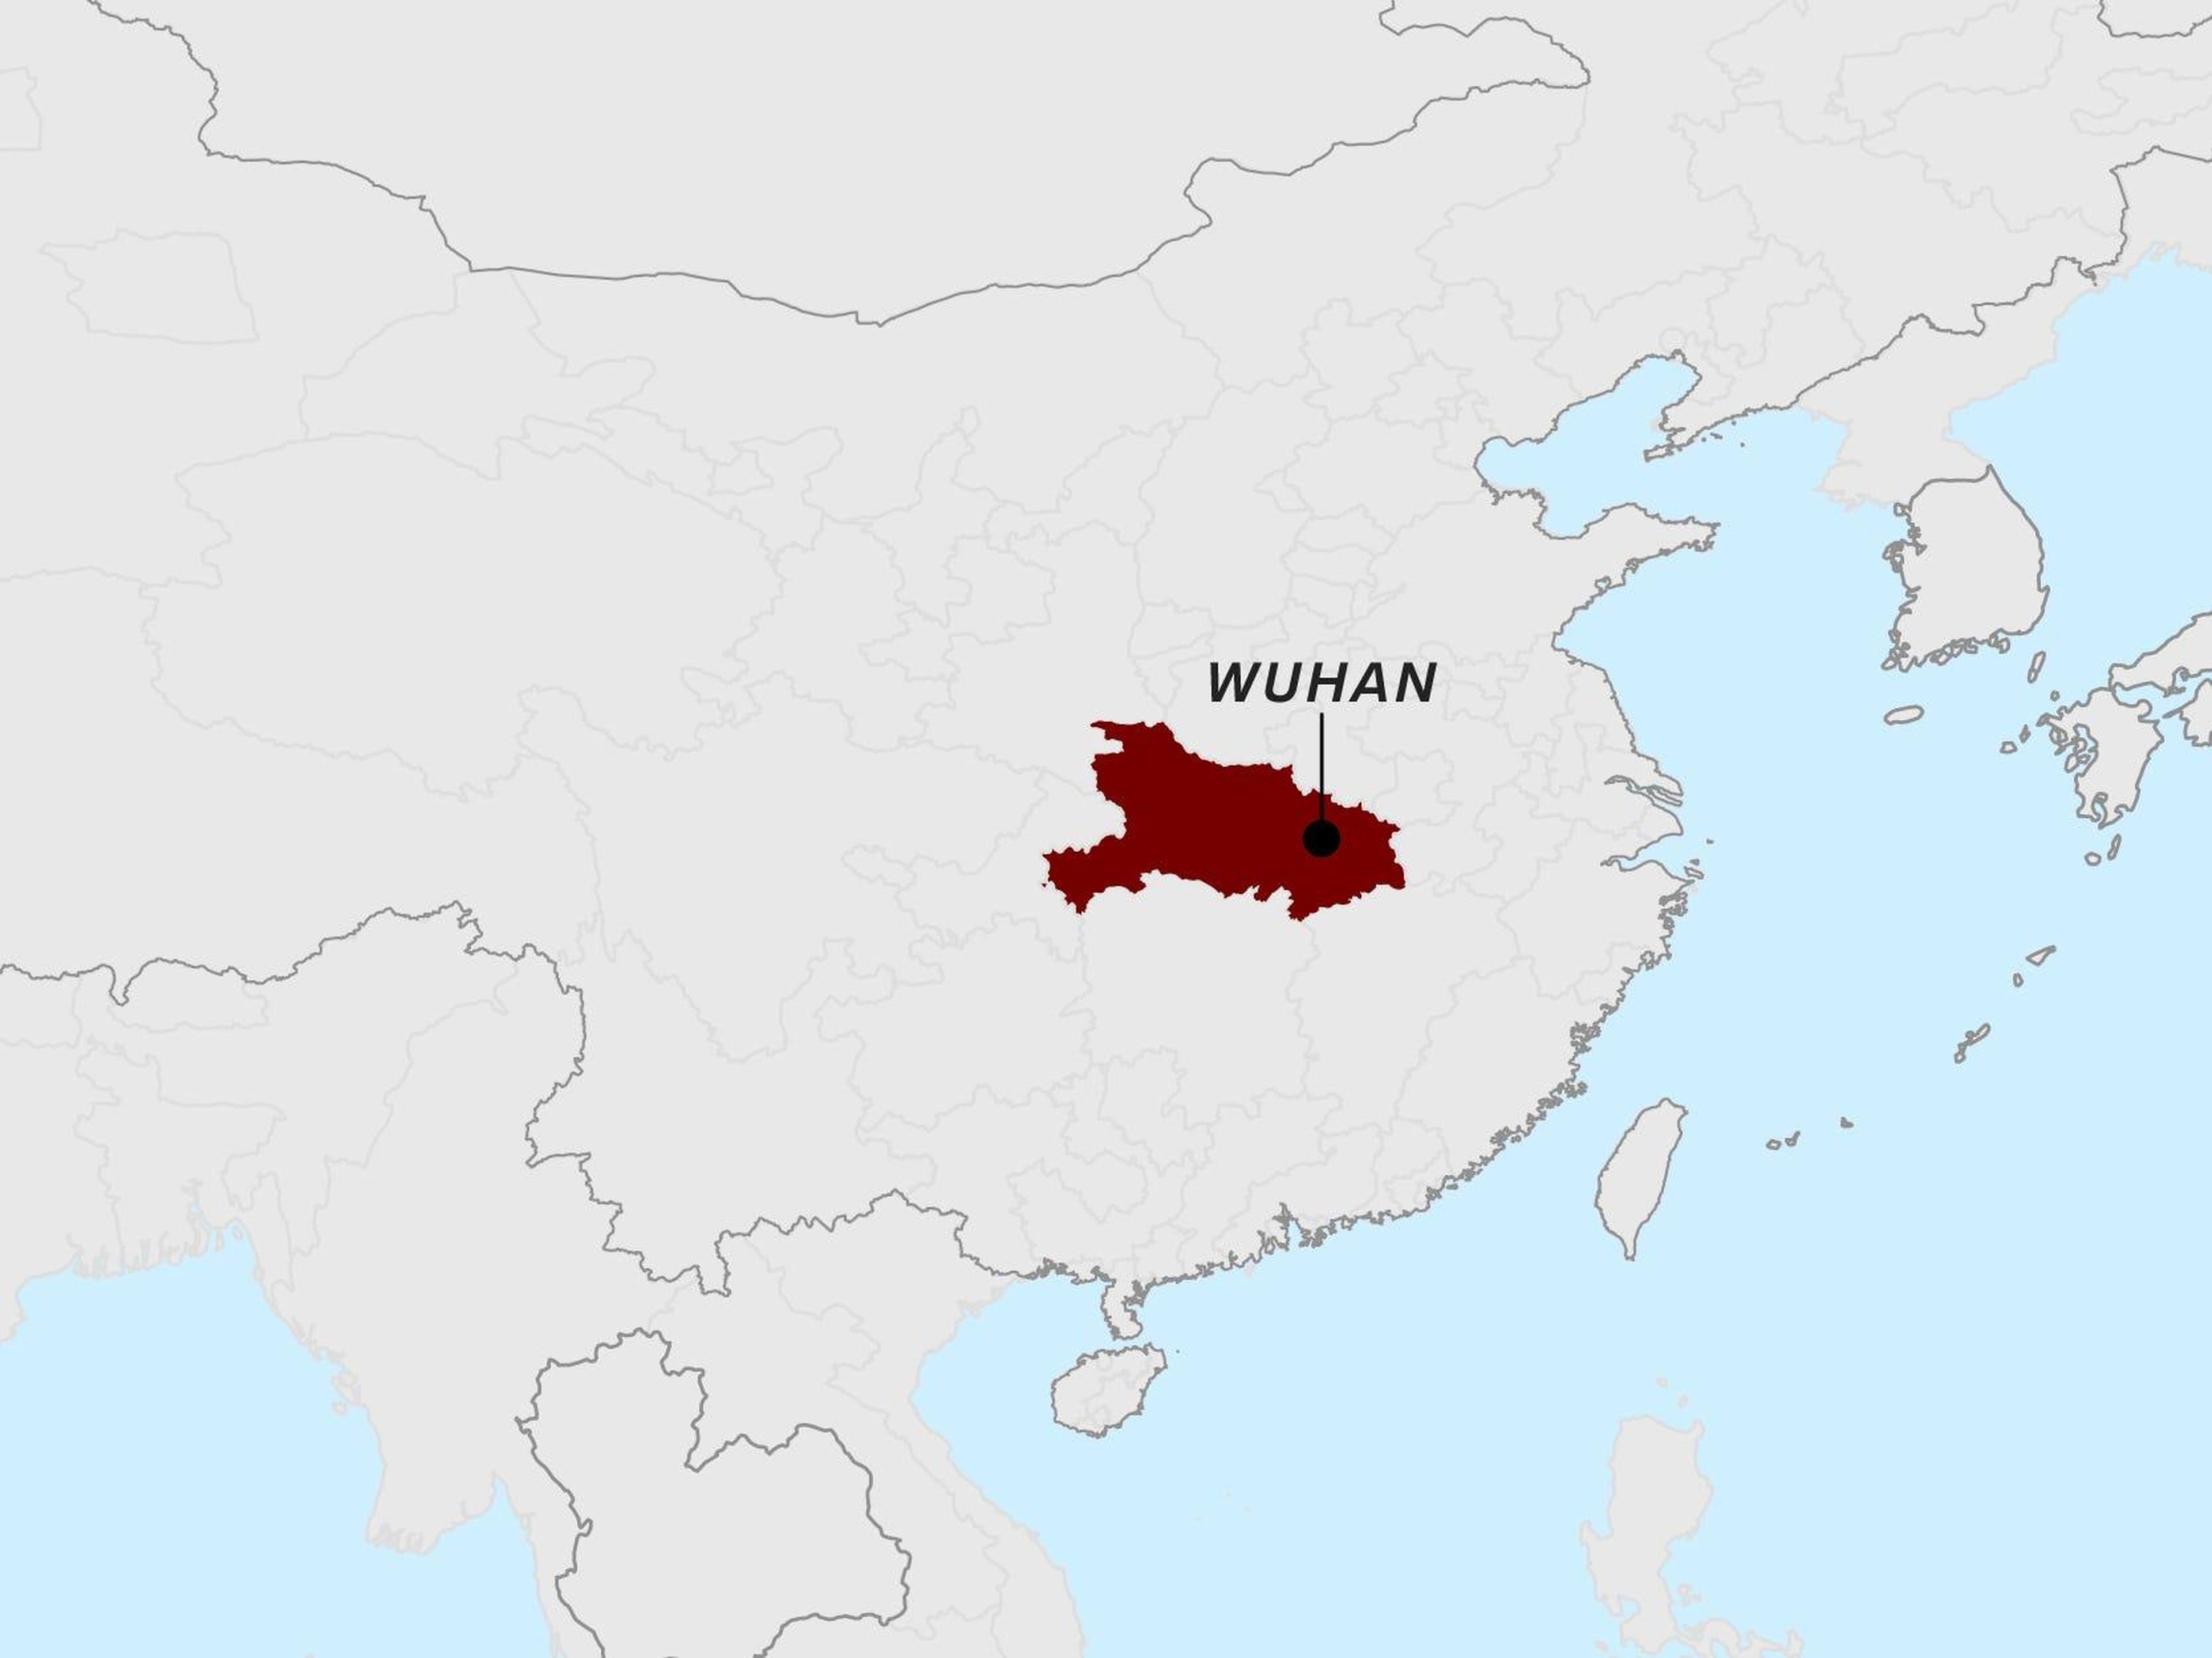 The first cluster of infections in Wuhan were reported in late December. However, the South China Morning Post reported that "patient zero" likely got sick in mid-November.